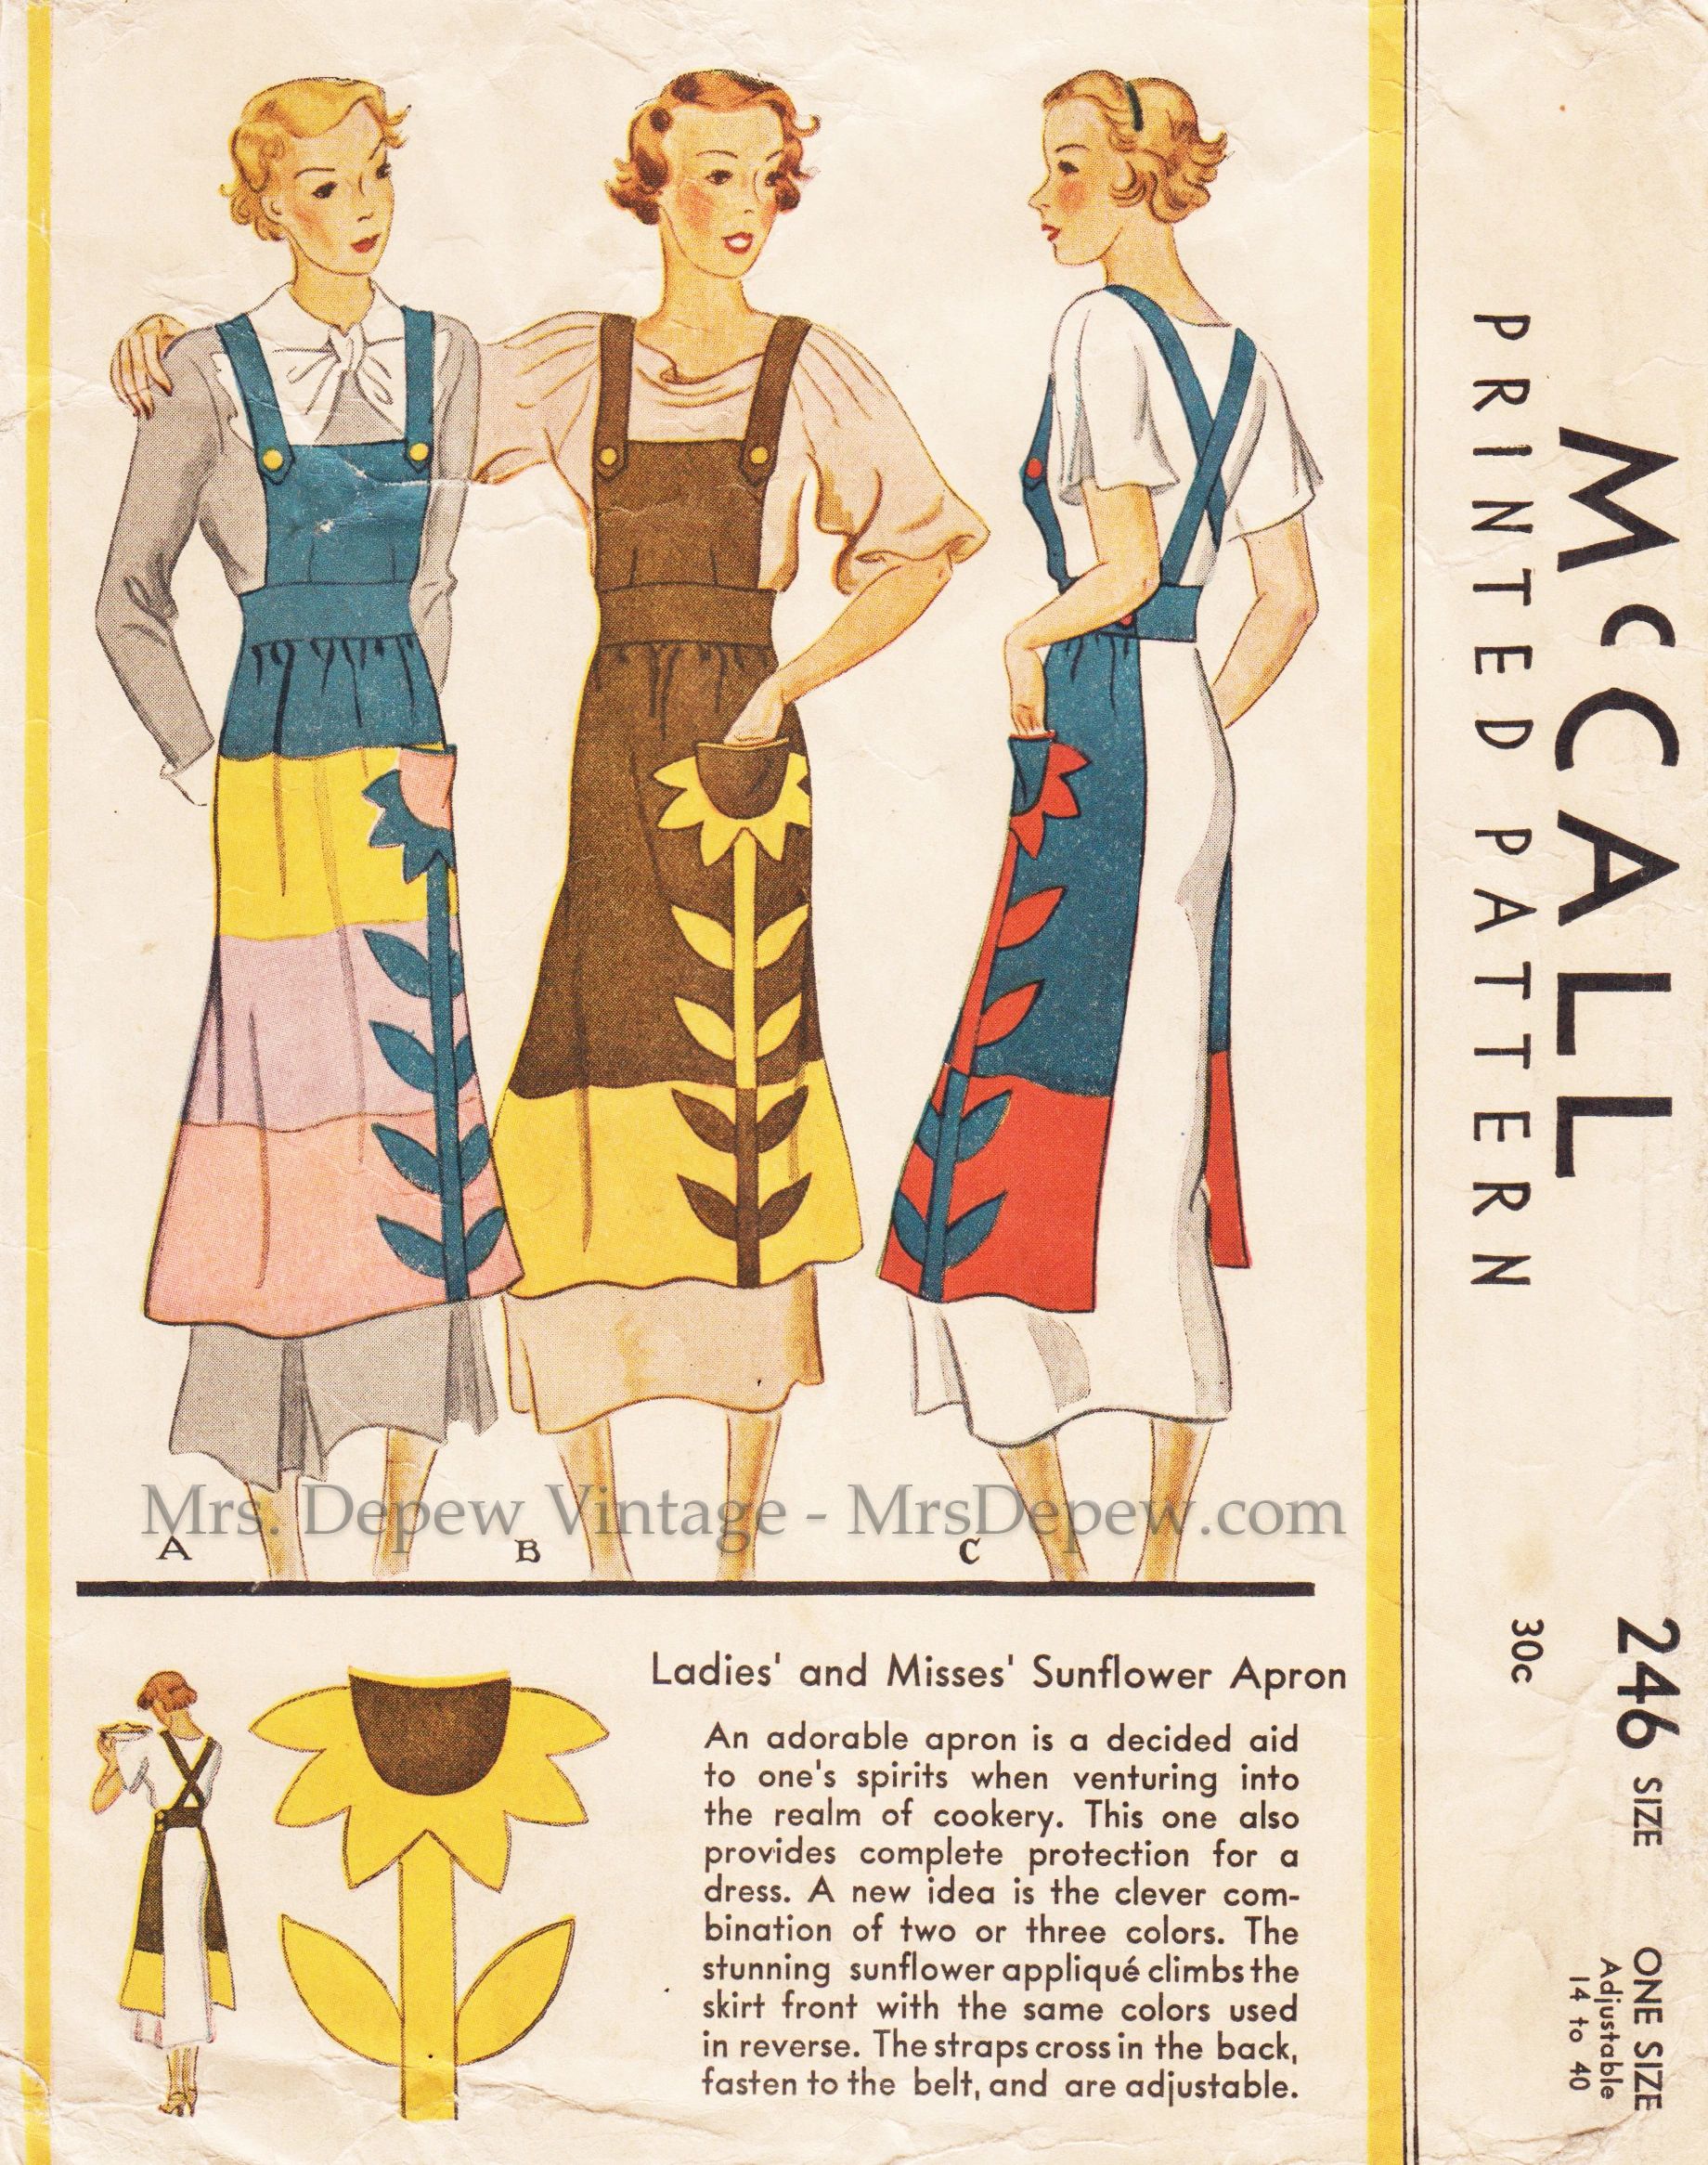 Why do we love Apron Patterns?